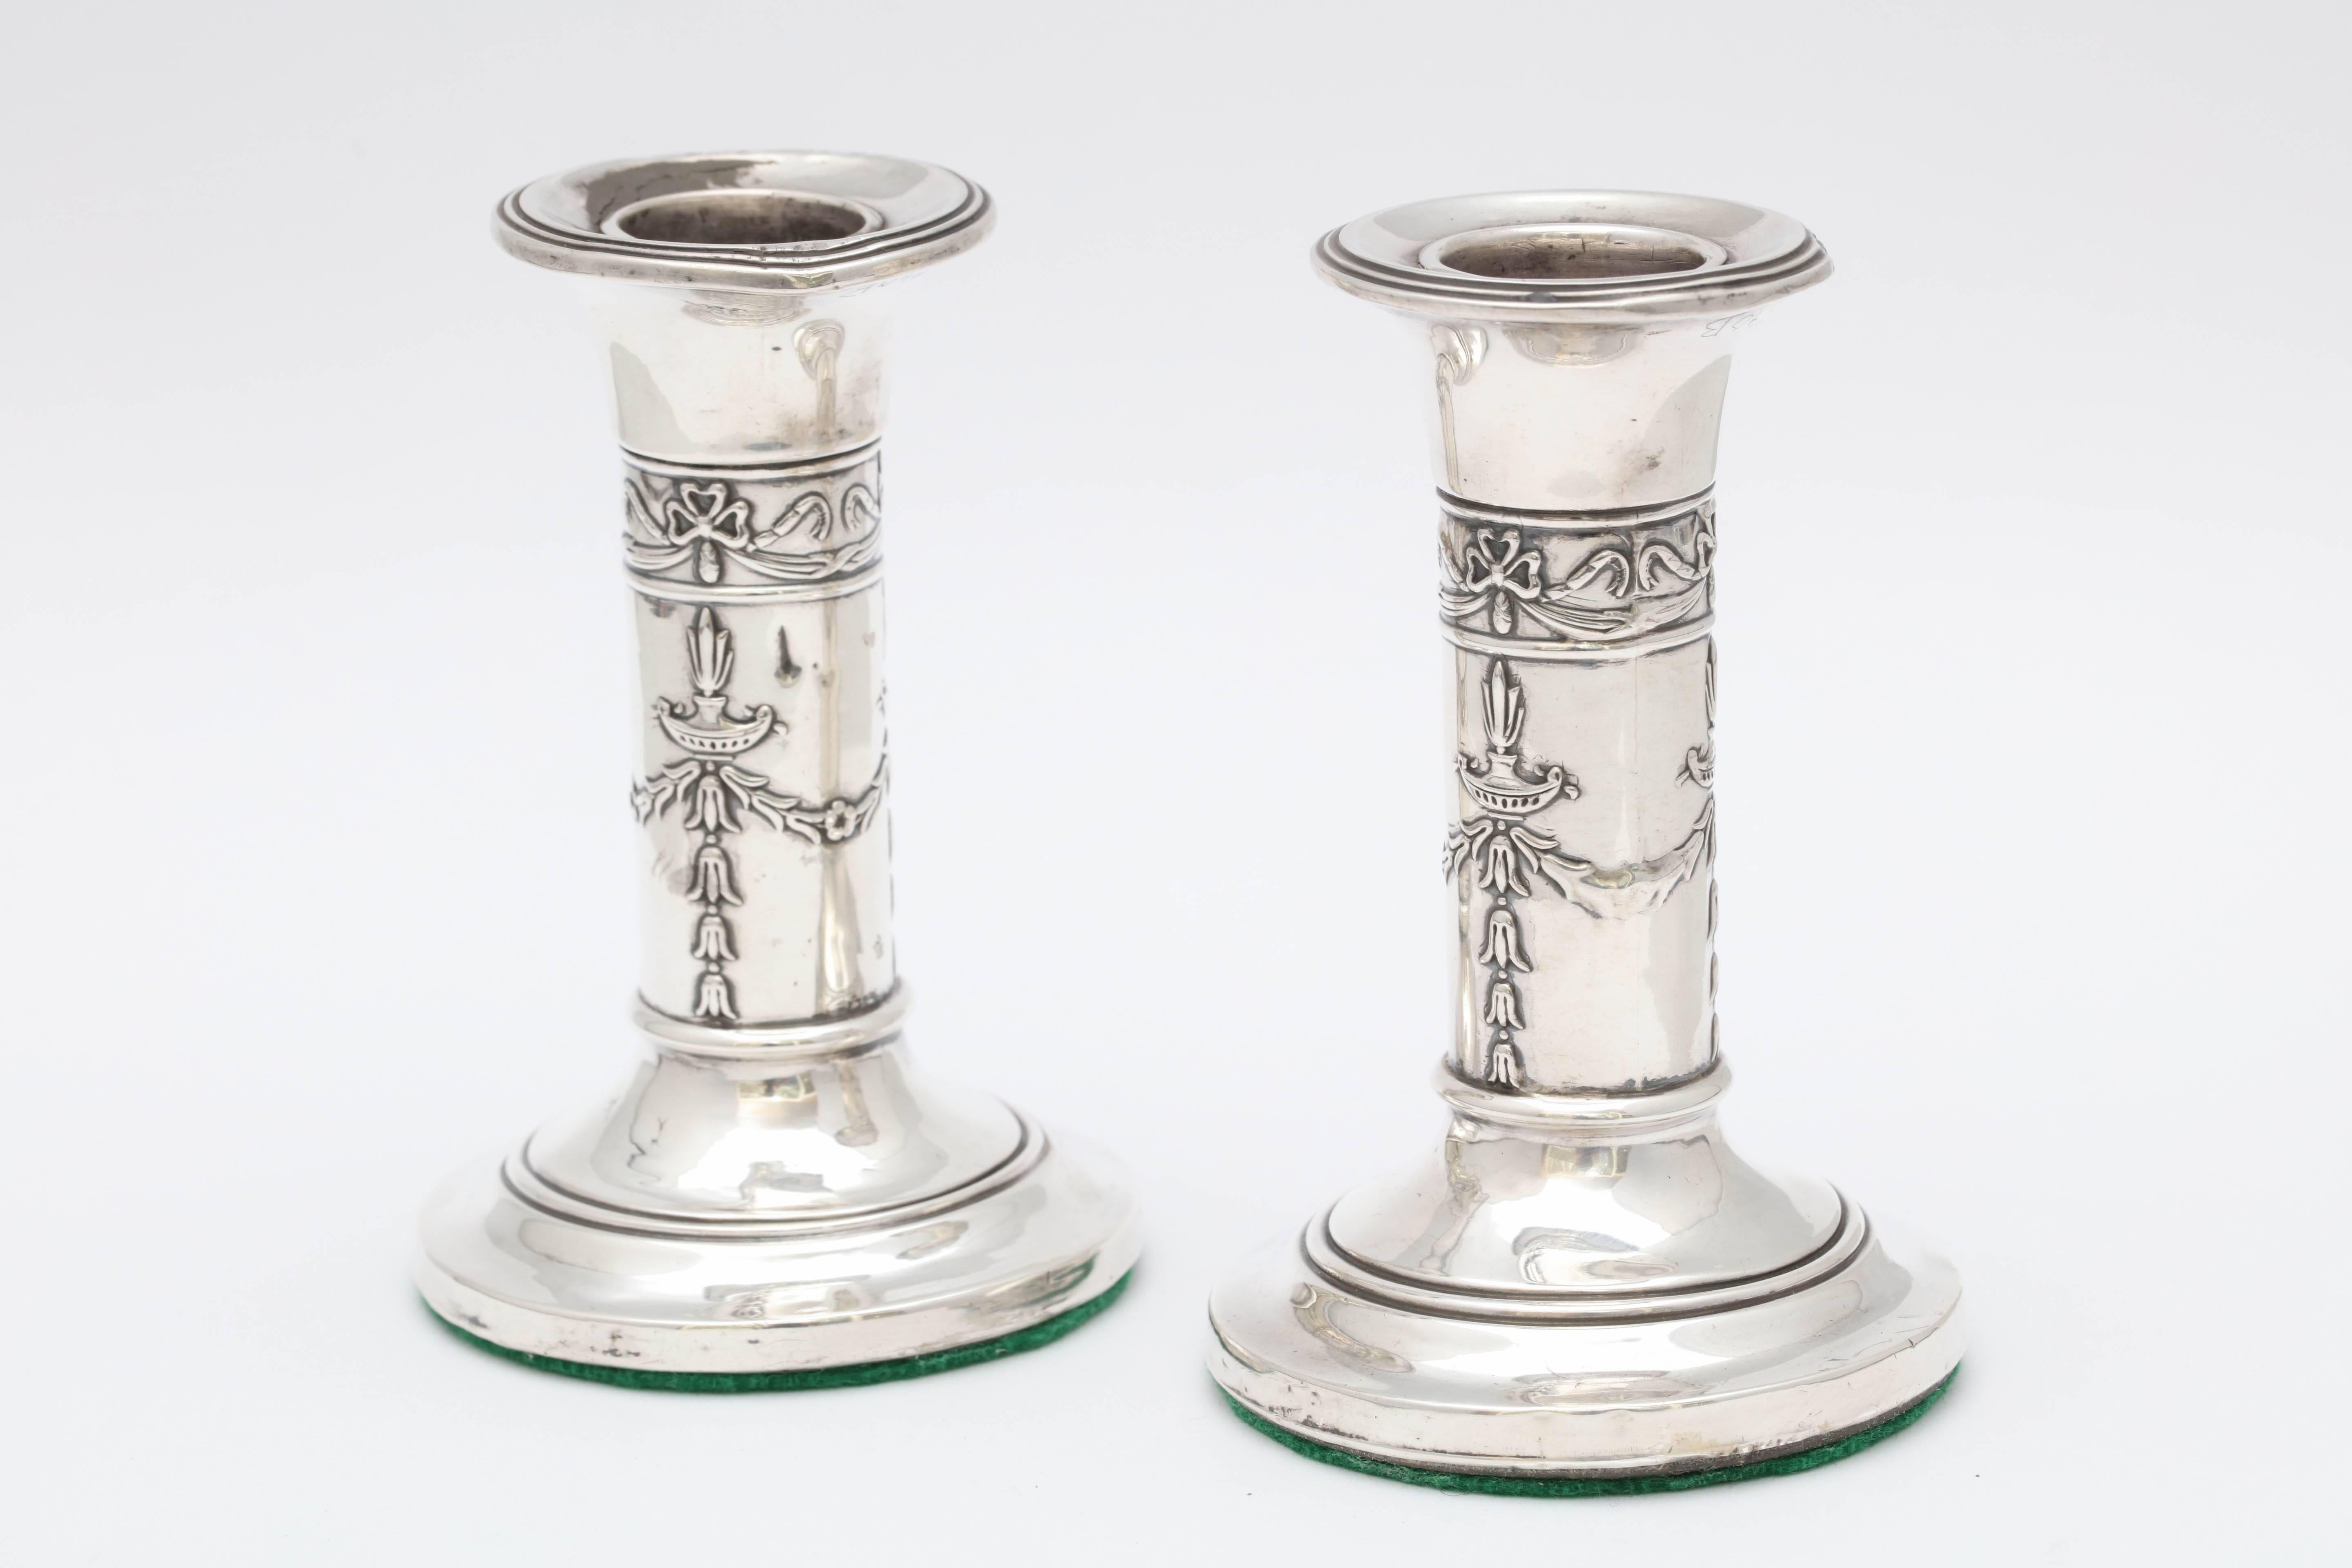 Pair of Small Edwardian Sterling Silver Candlesticks 1